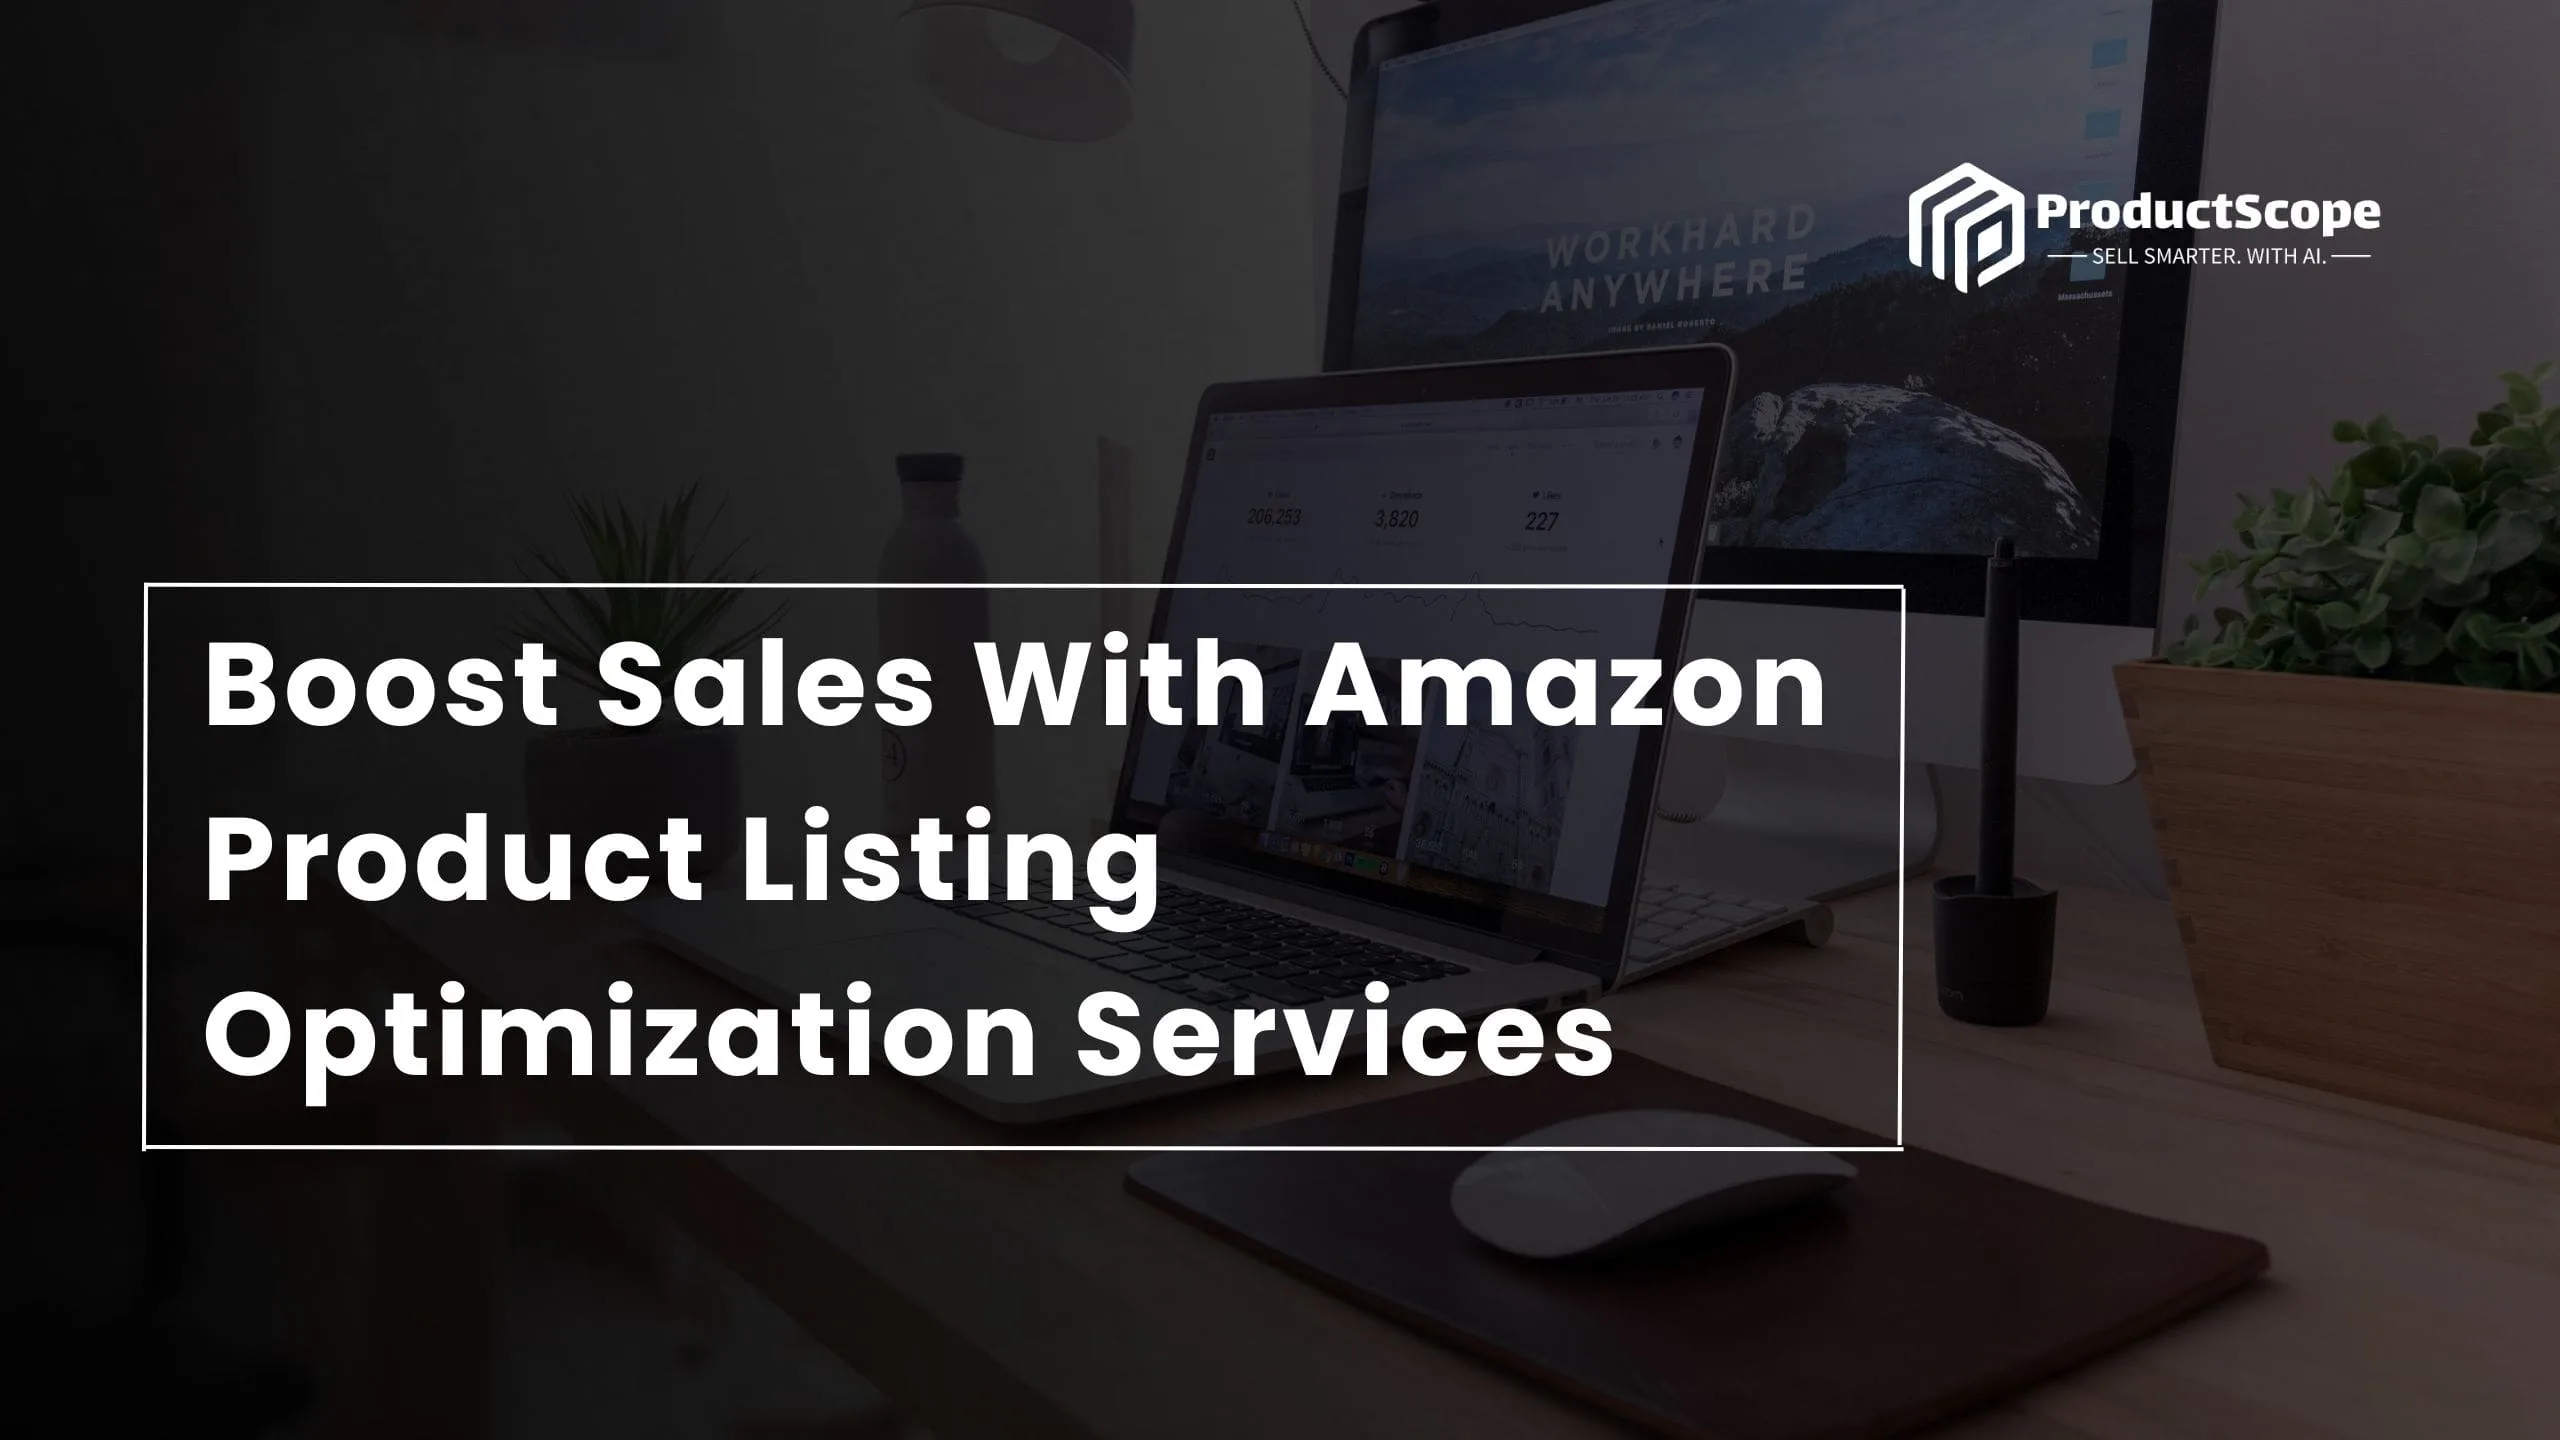 Boost sales with Amazon Product listing optimization services